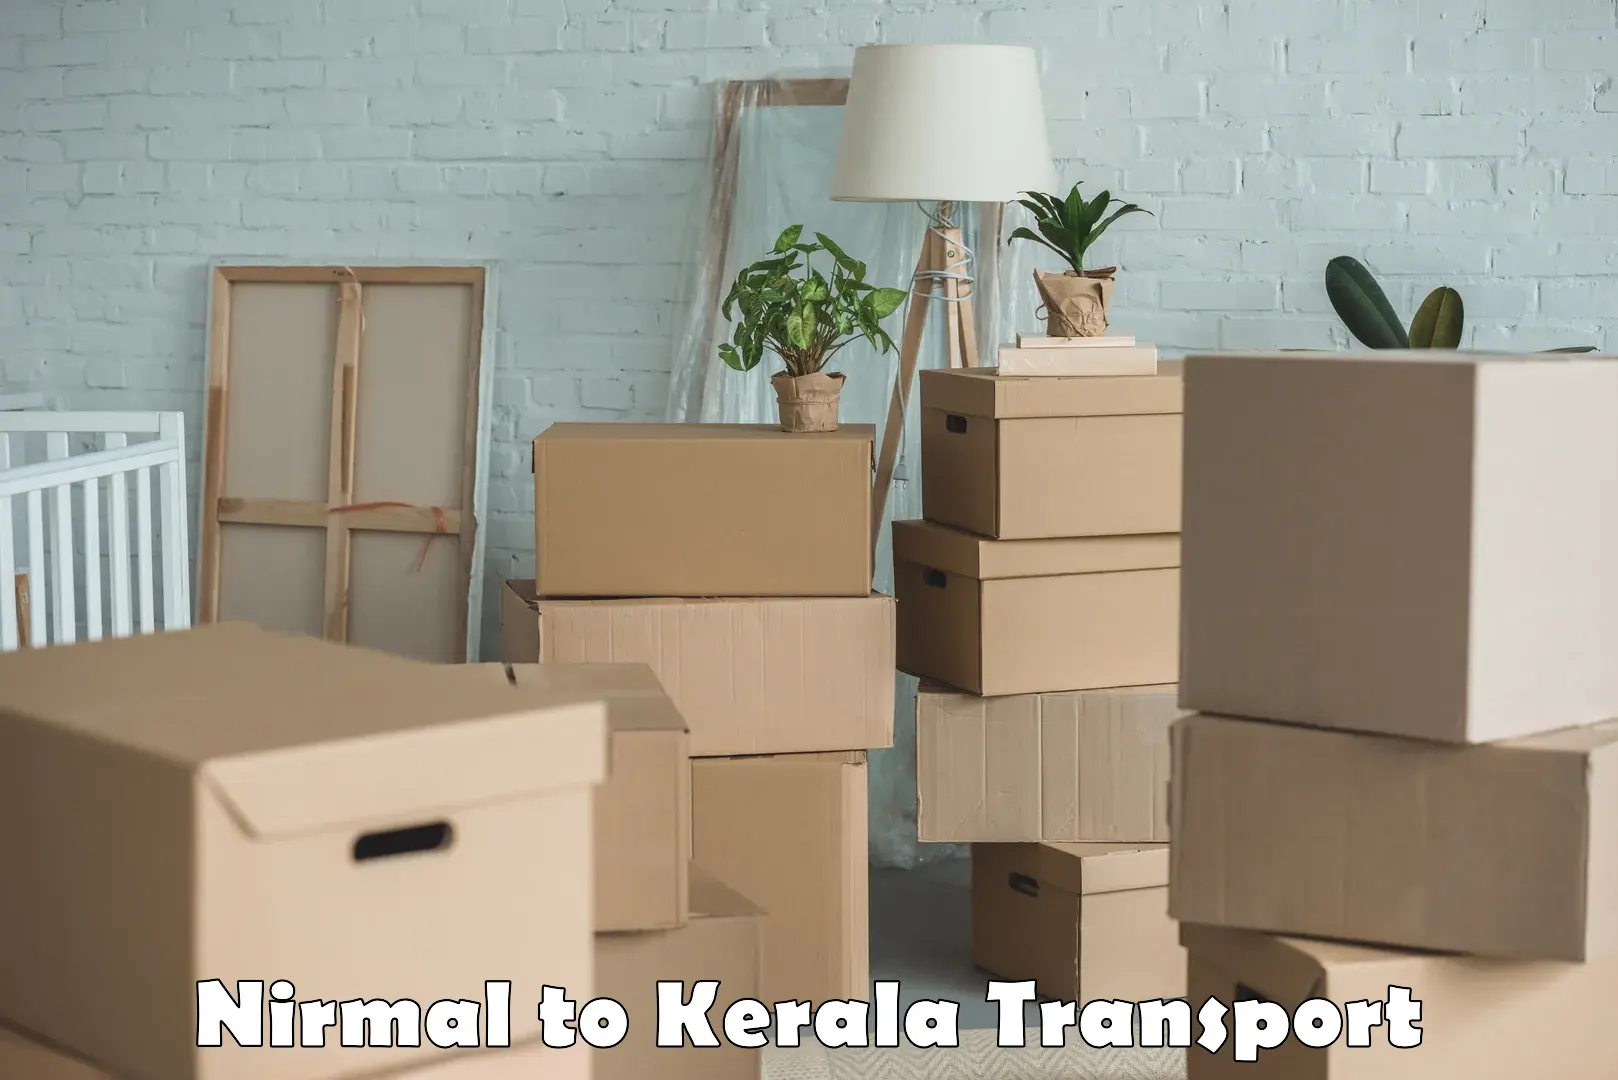 Online transport service Nirmal to Cochin University of Science and Technology